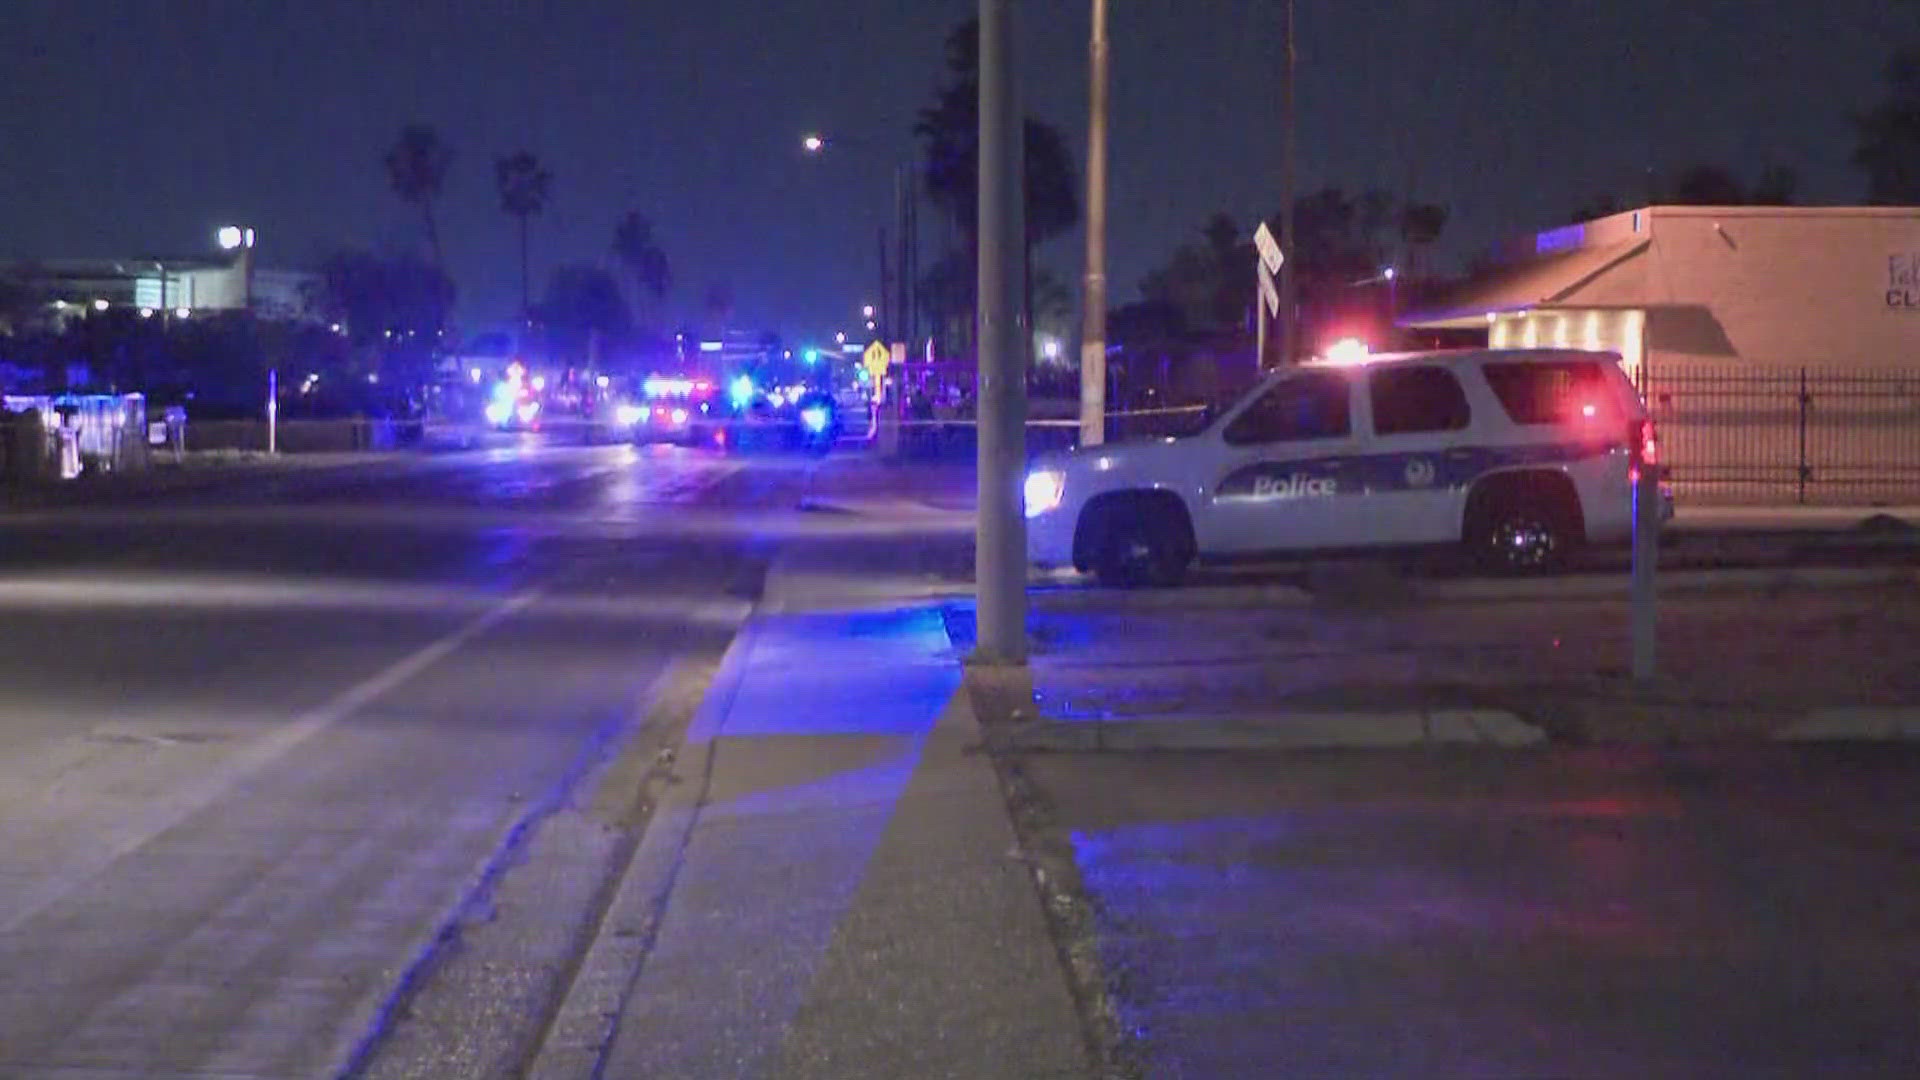 The shooting happened shortly before midnight near 35th Avenue and Roosevelt Street.